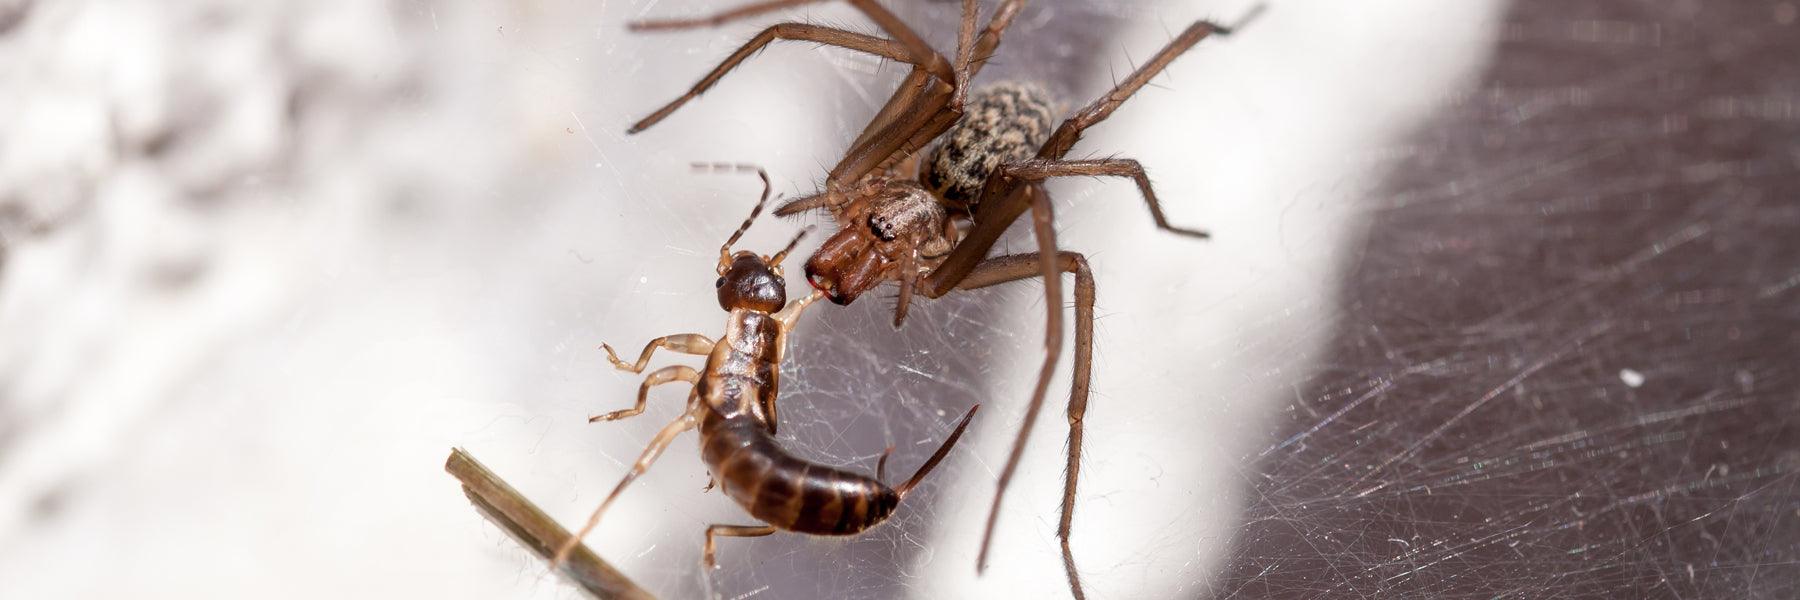 What Are the Differences Between Earwigs and Spiders? - Phoenix Environmental Design Inc.